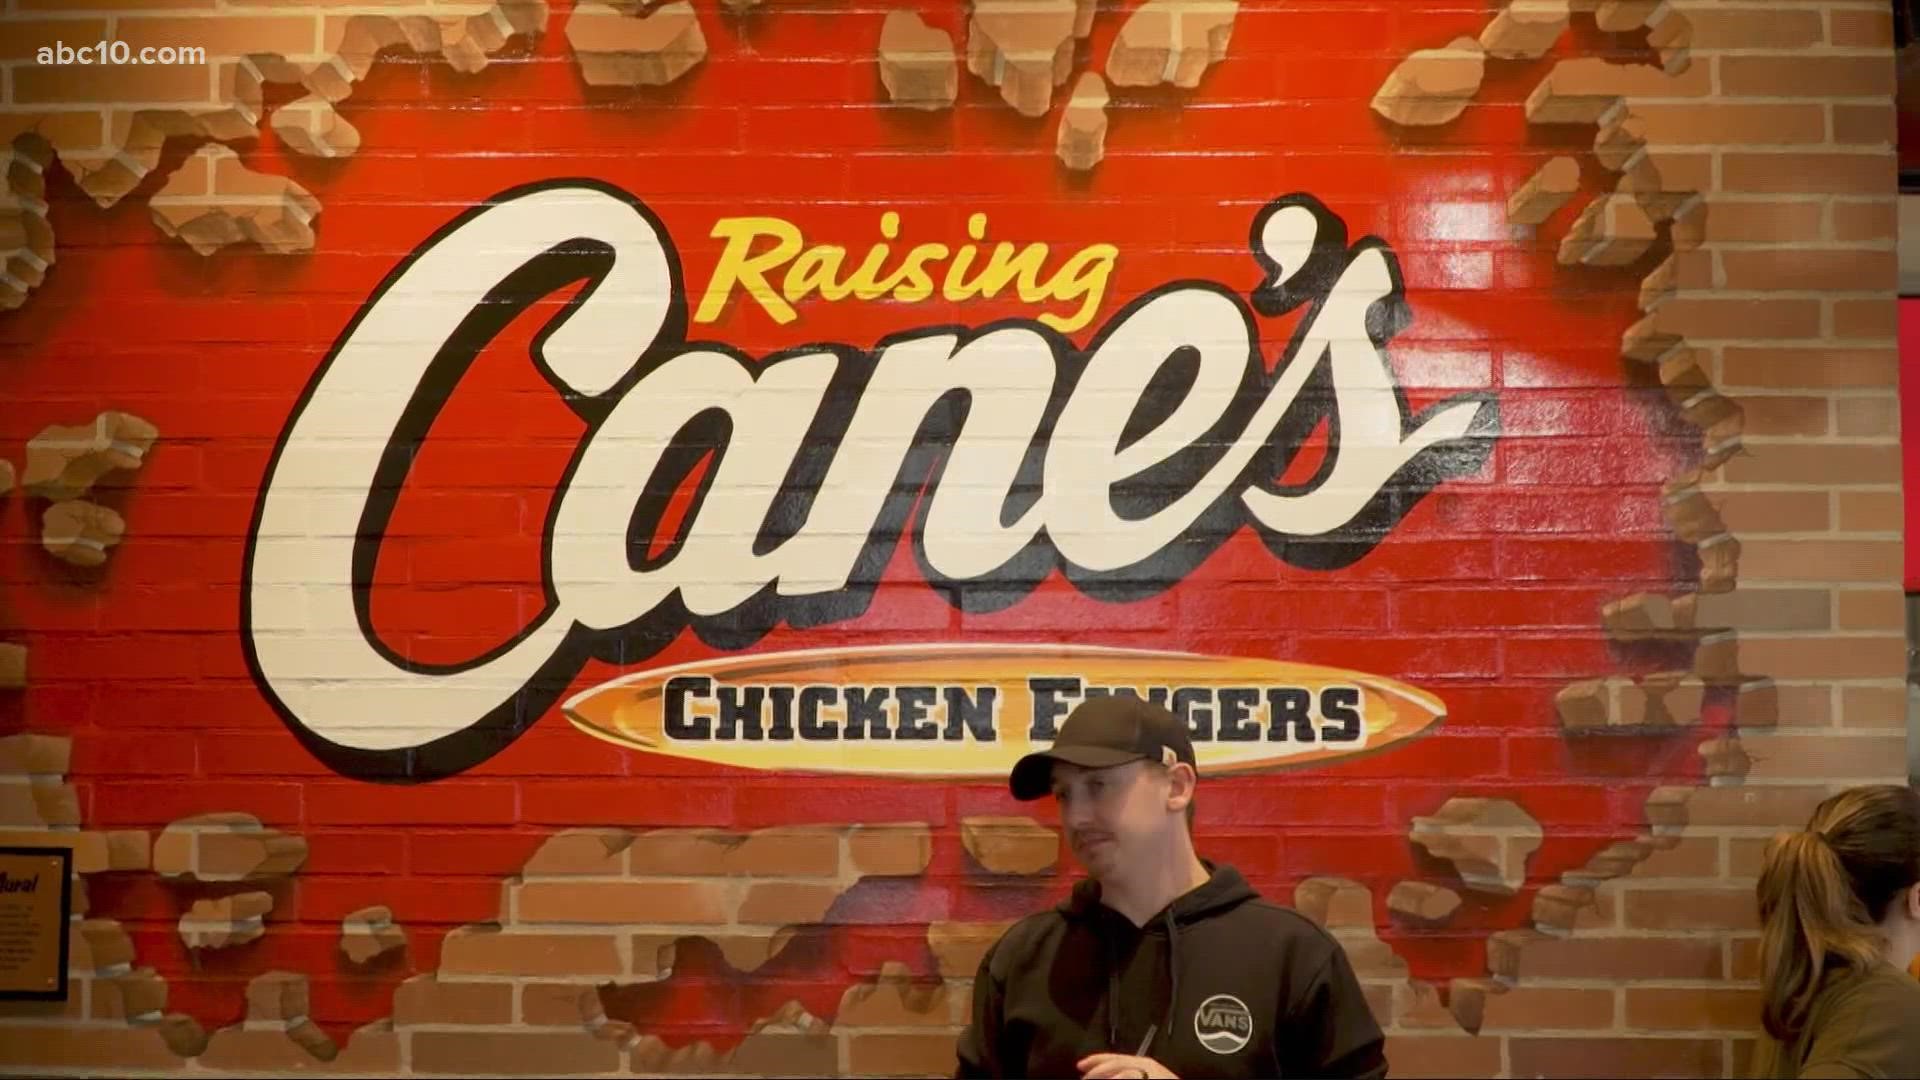 Raising Cane's opened it's 4th Northern California location in Citrus Heights on sunday.